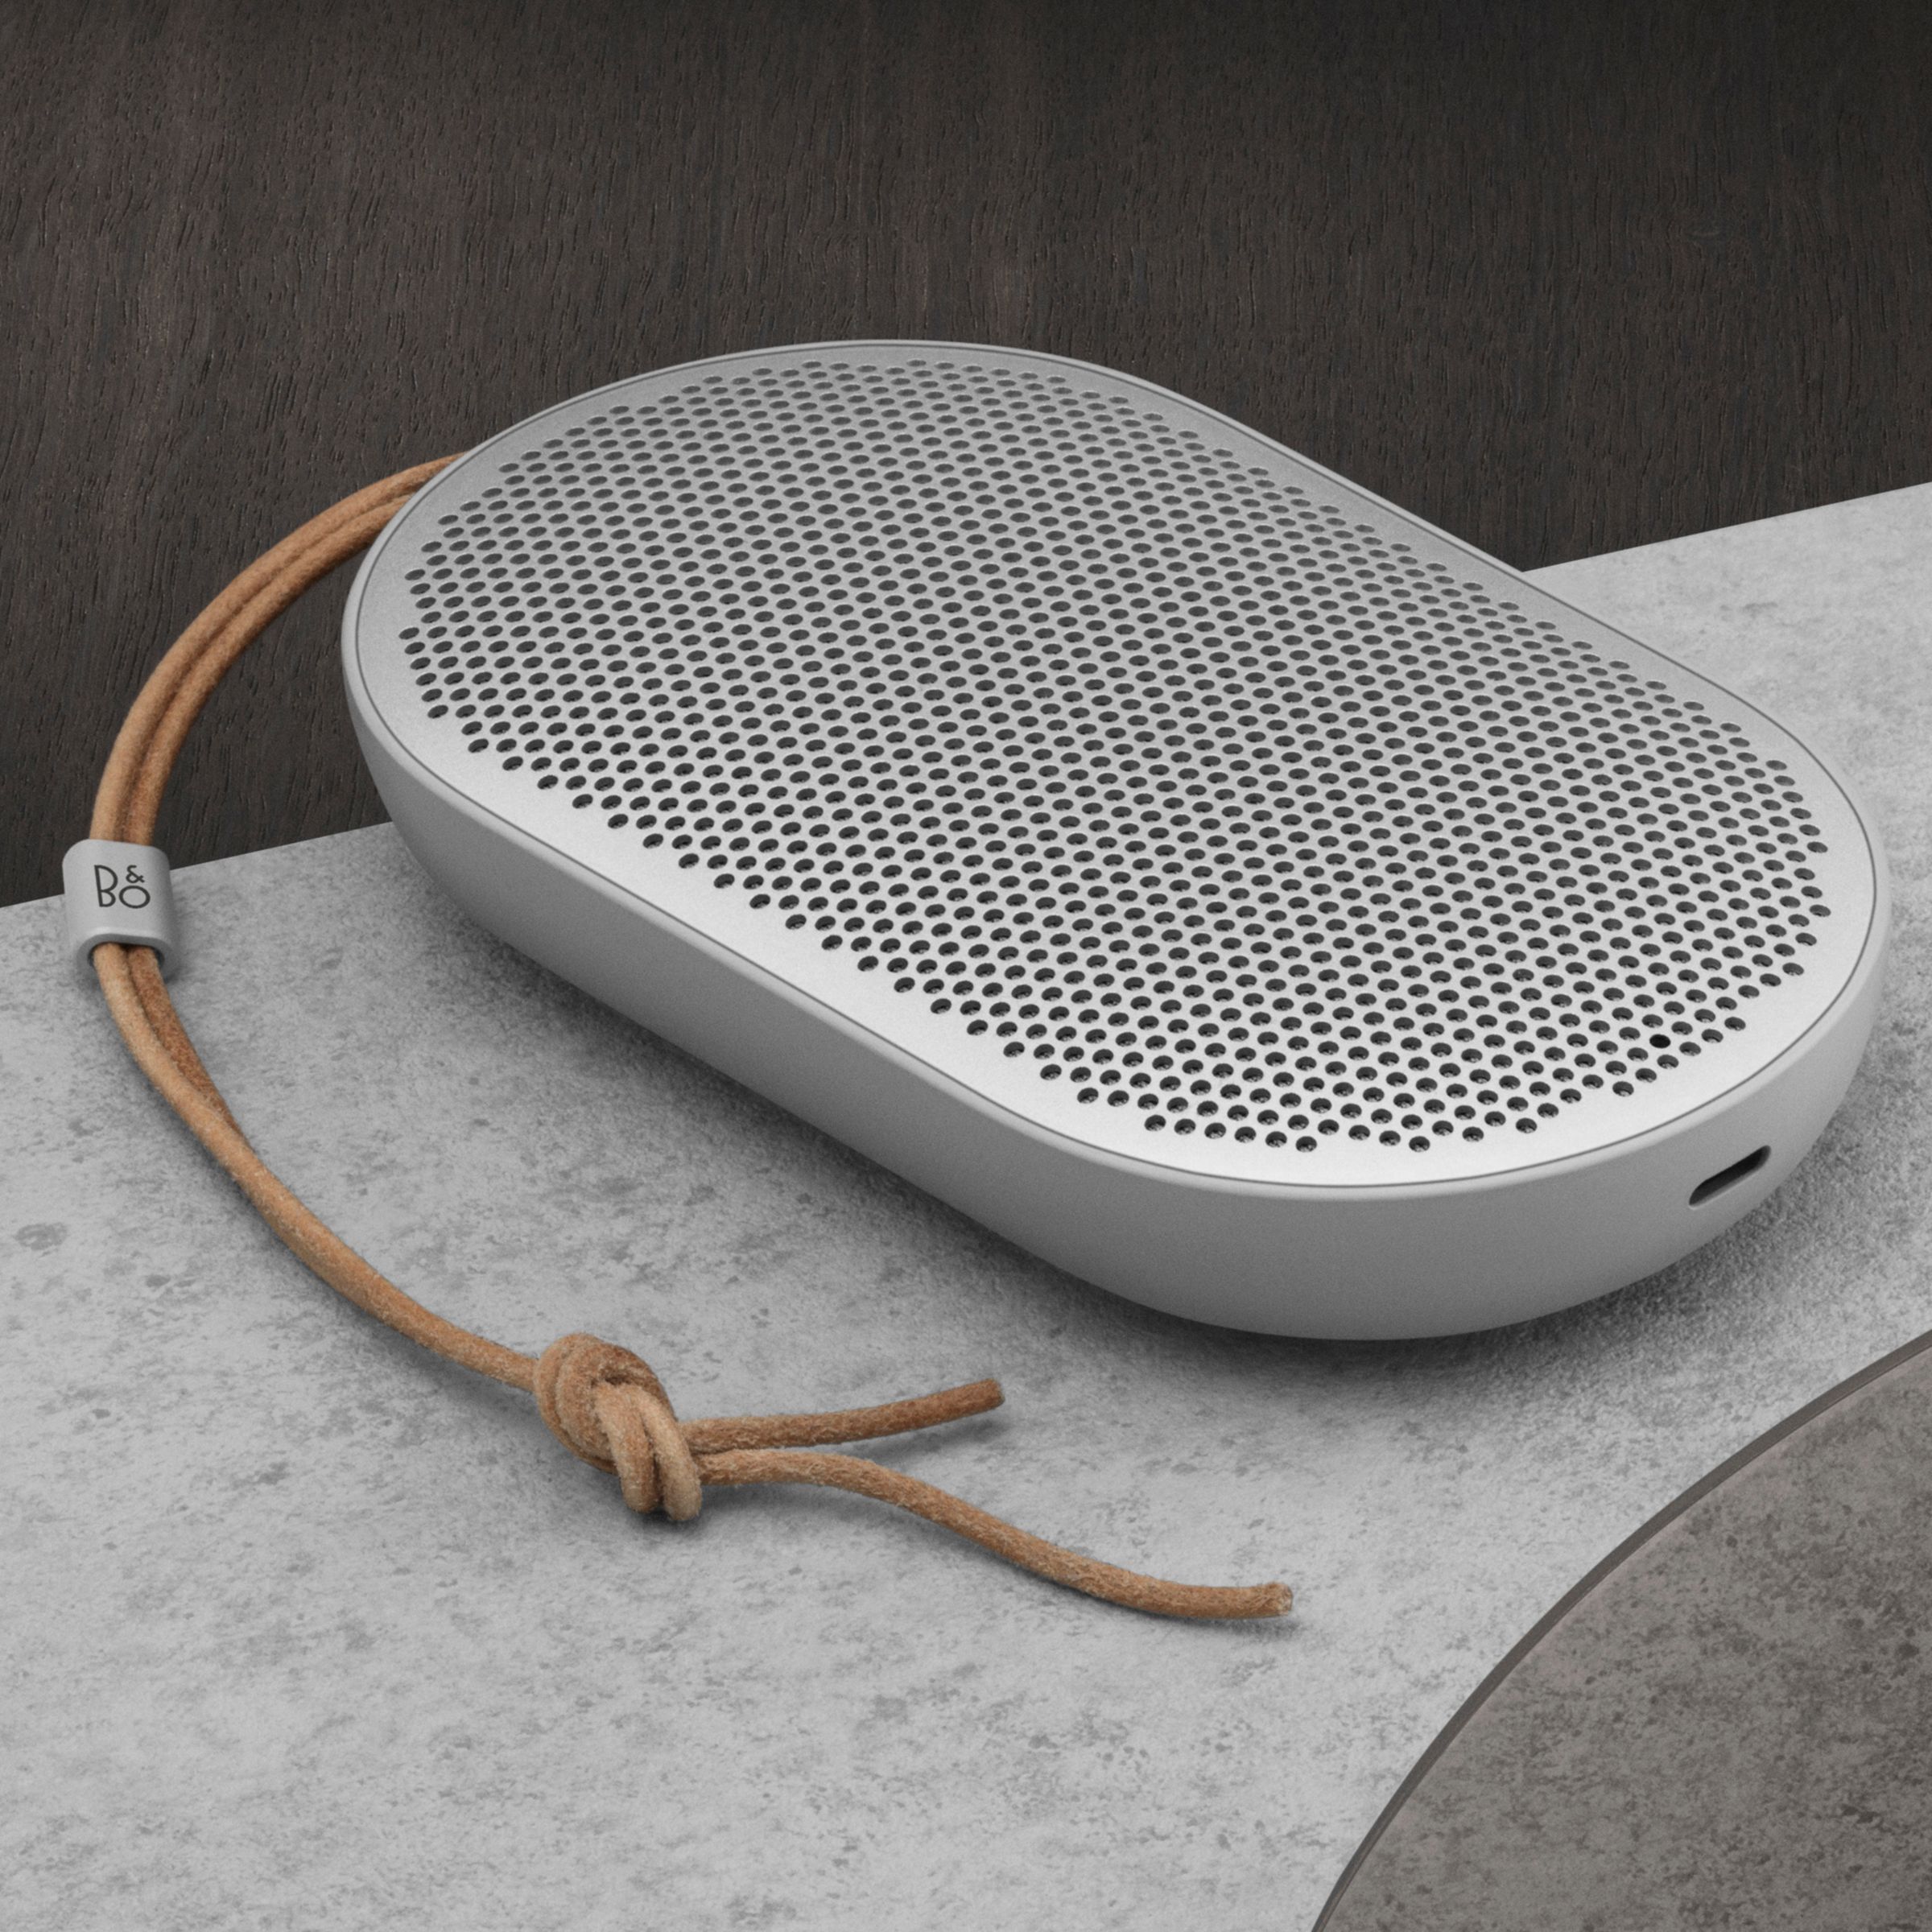 Bang olufsen a1. Bang Olufsen p2. BEOPLAY p2. BEOPLAY p2 Supreme. P2 Portable Bluetooth Speaker b&o.